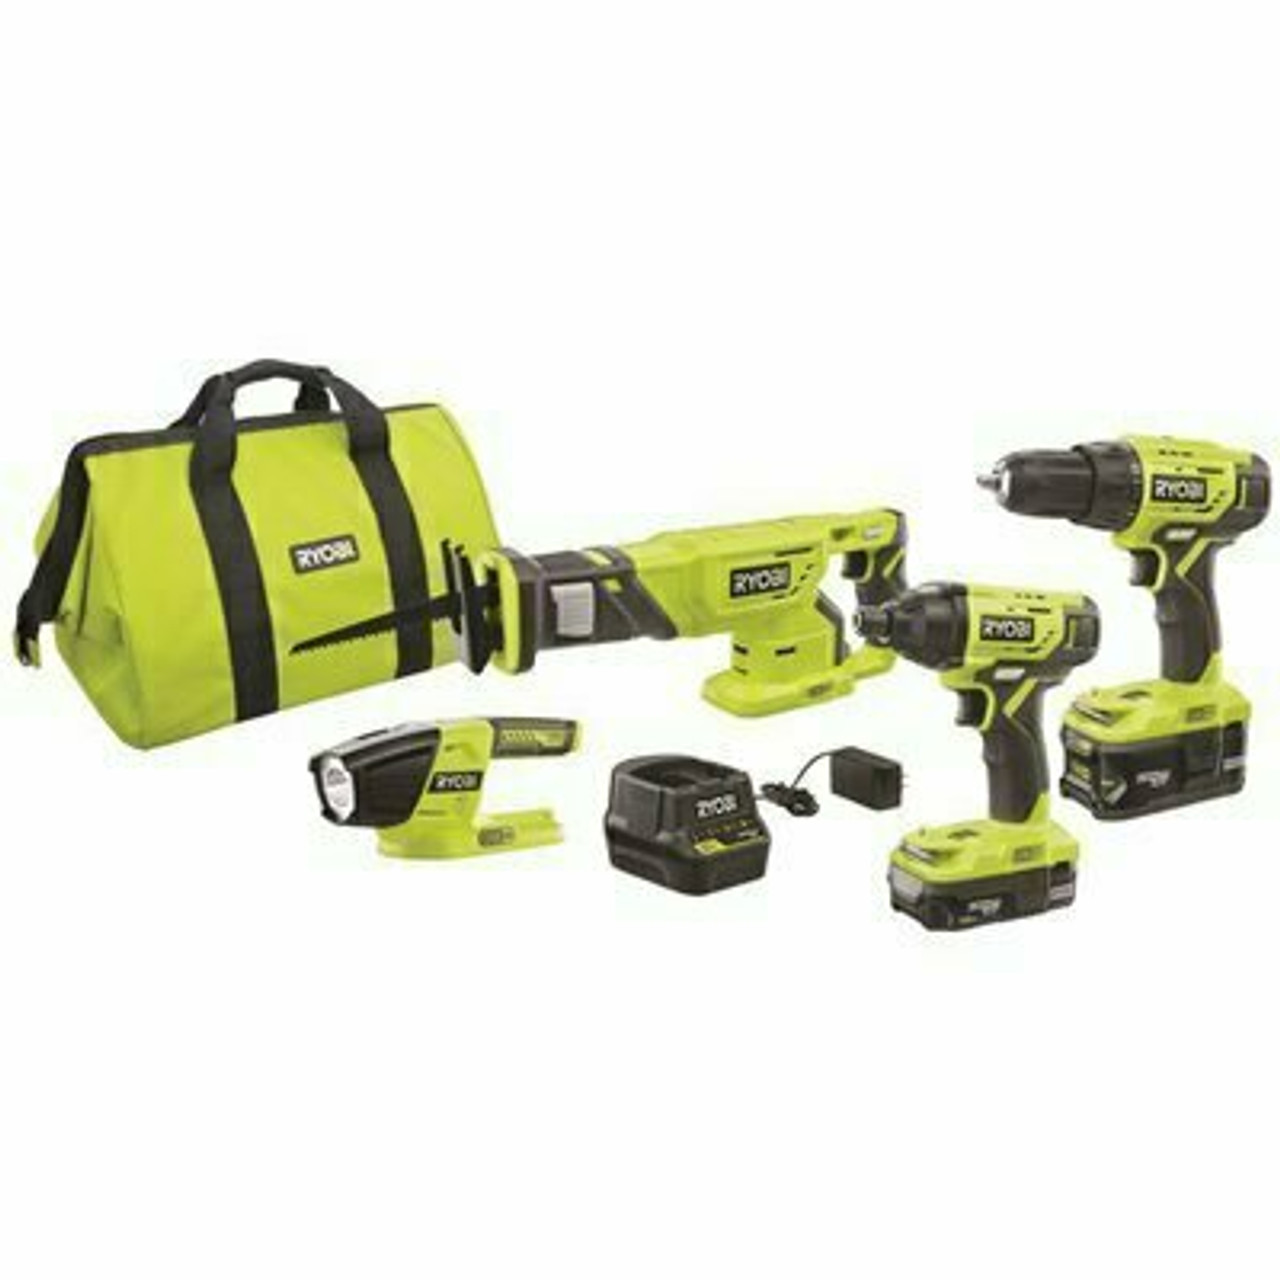 Ryobi One+ 18V Lithium-Ion Cordless 4-Tool Combo Kit With (2) Batteries, 18V Charger, And Bag